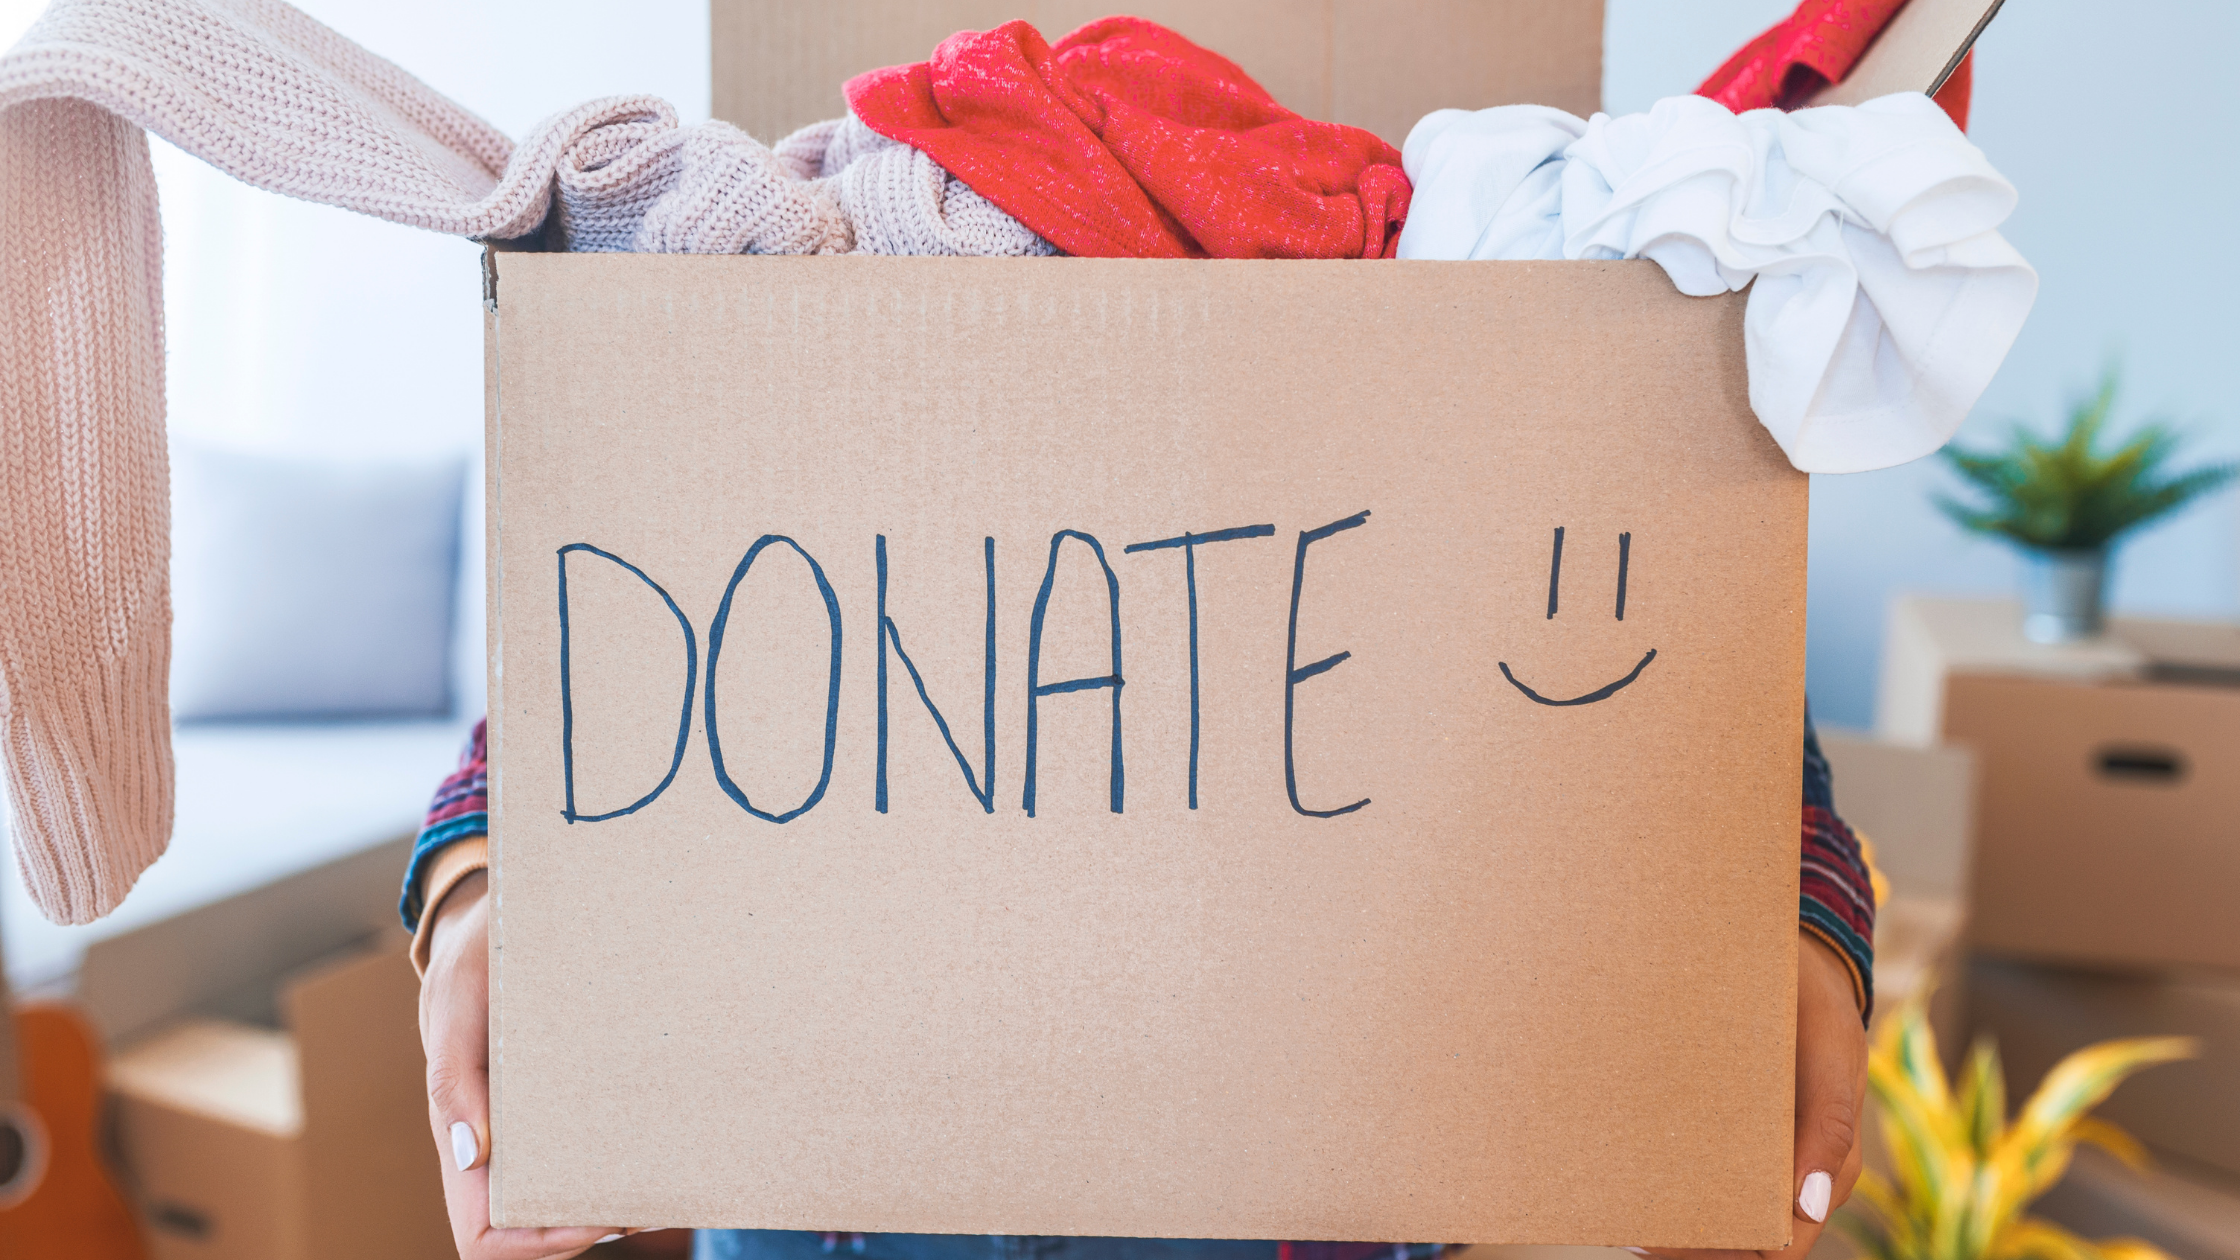 Donate Items On Our Winter Needs List